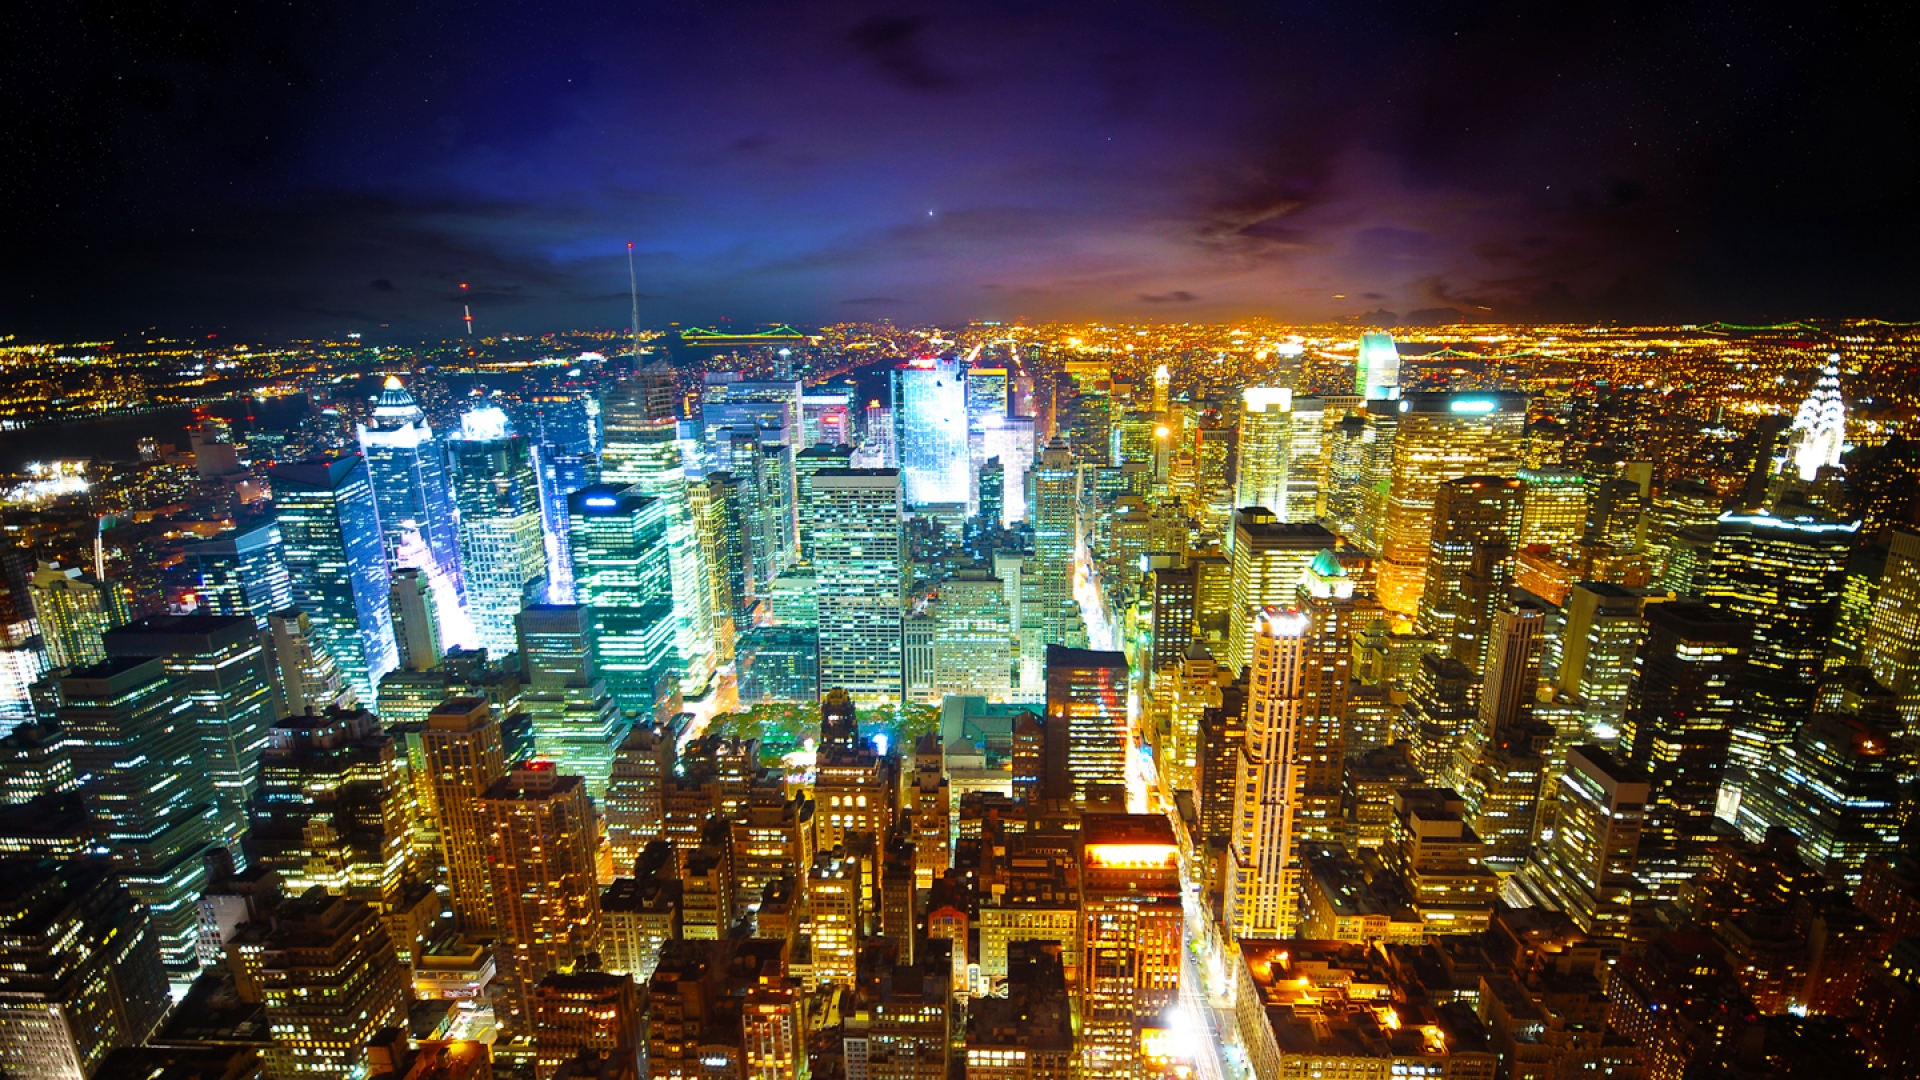 Brightly lit city wallpaper - HD Wallpapers